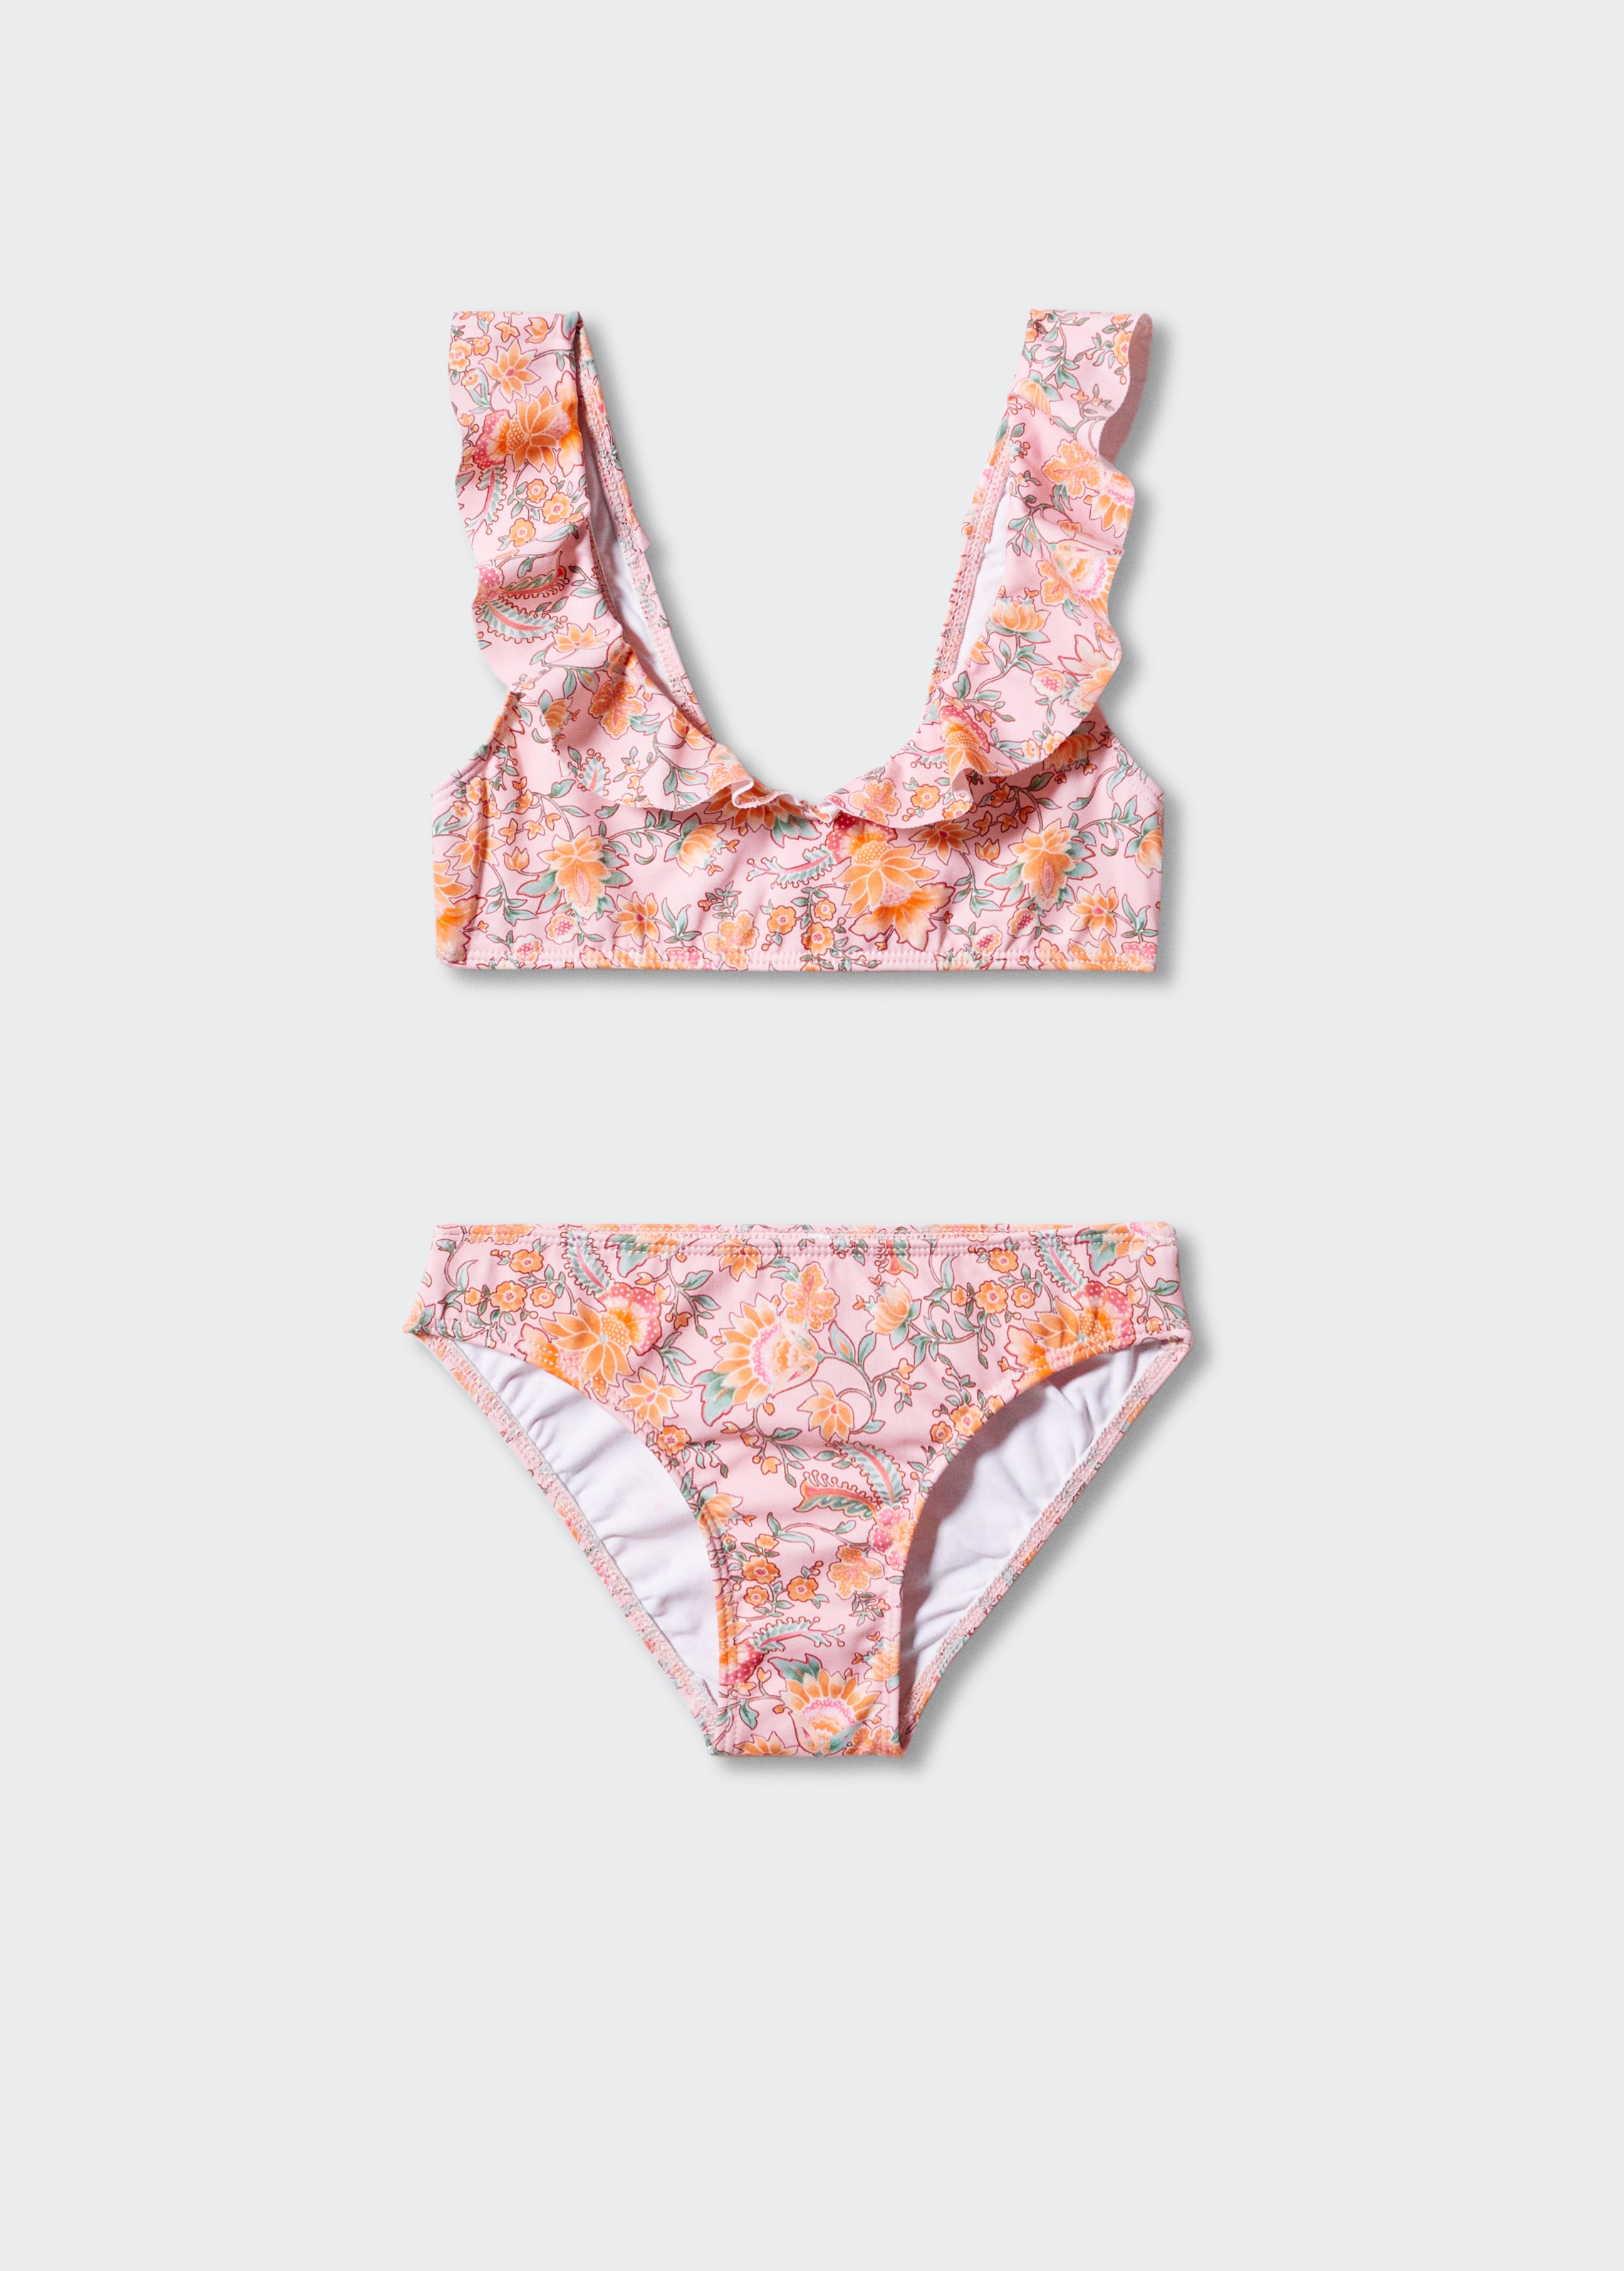 Floral print bikini - Article without model